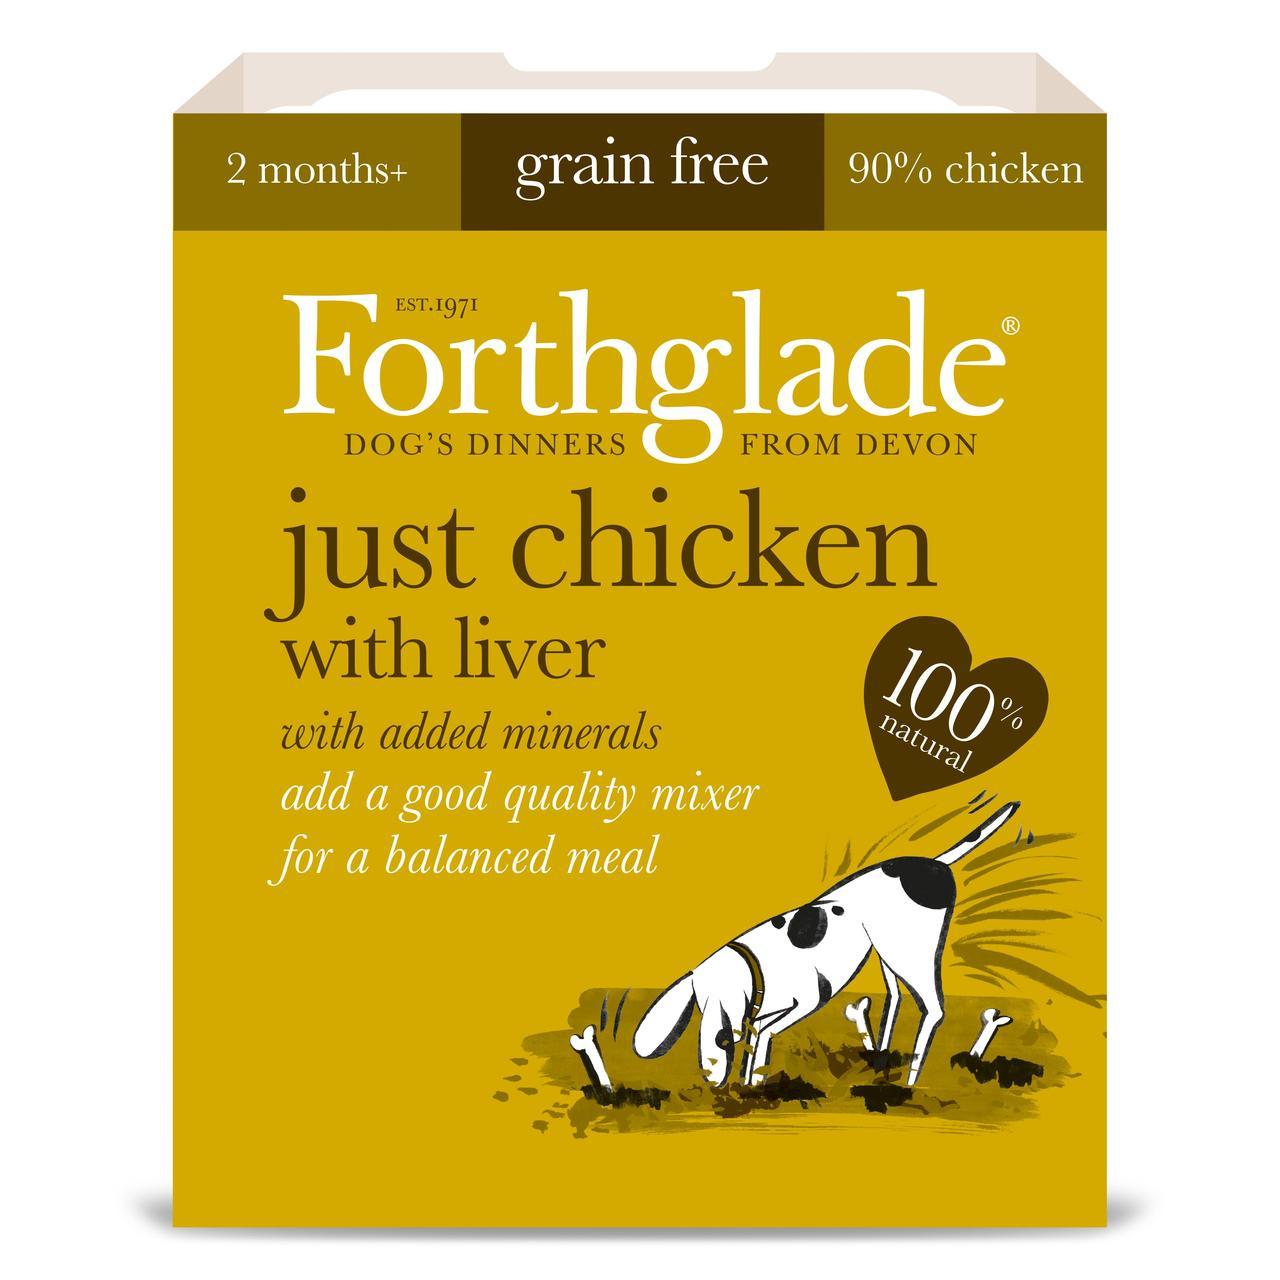 Forthglade Just Chicken with Liver Grain Free 395g